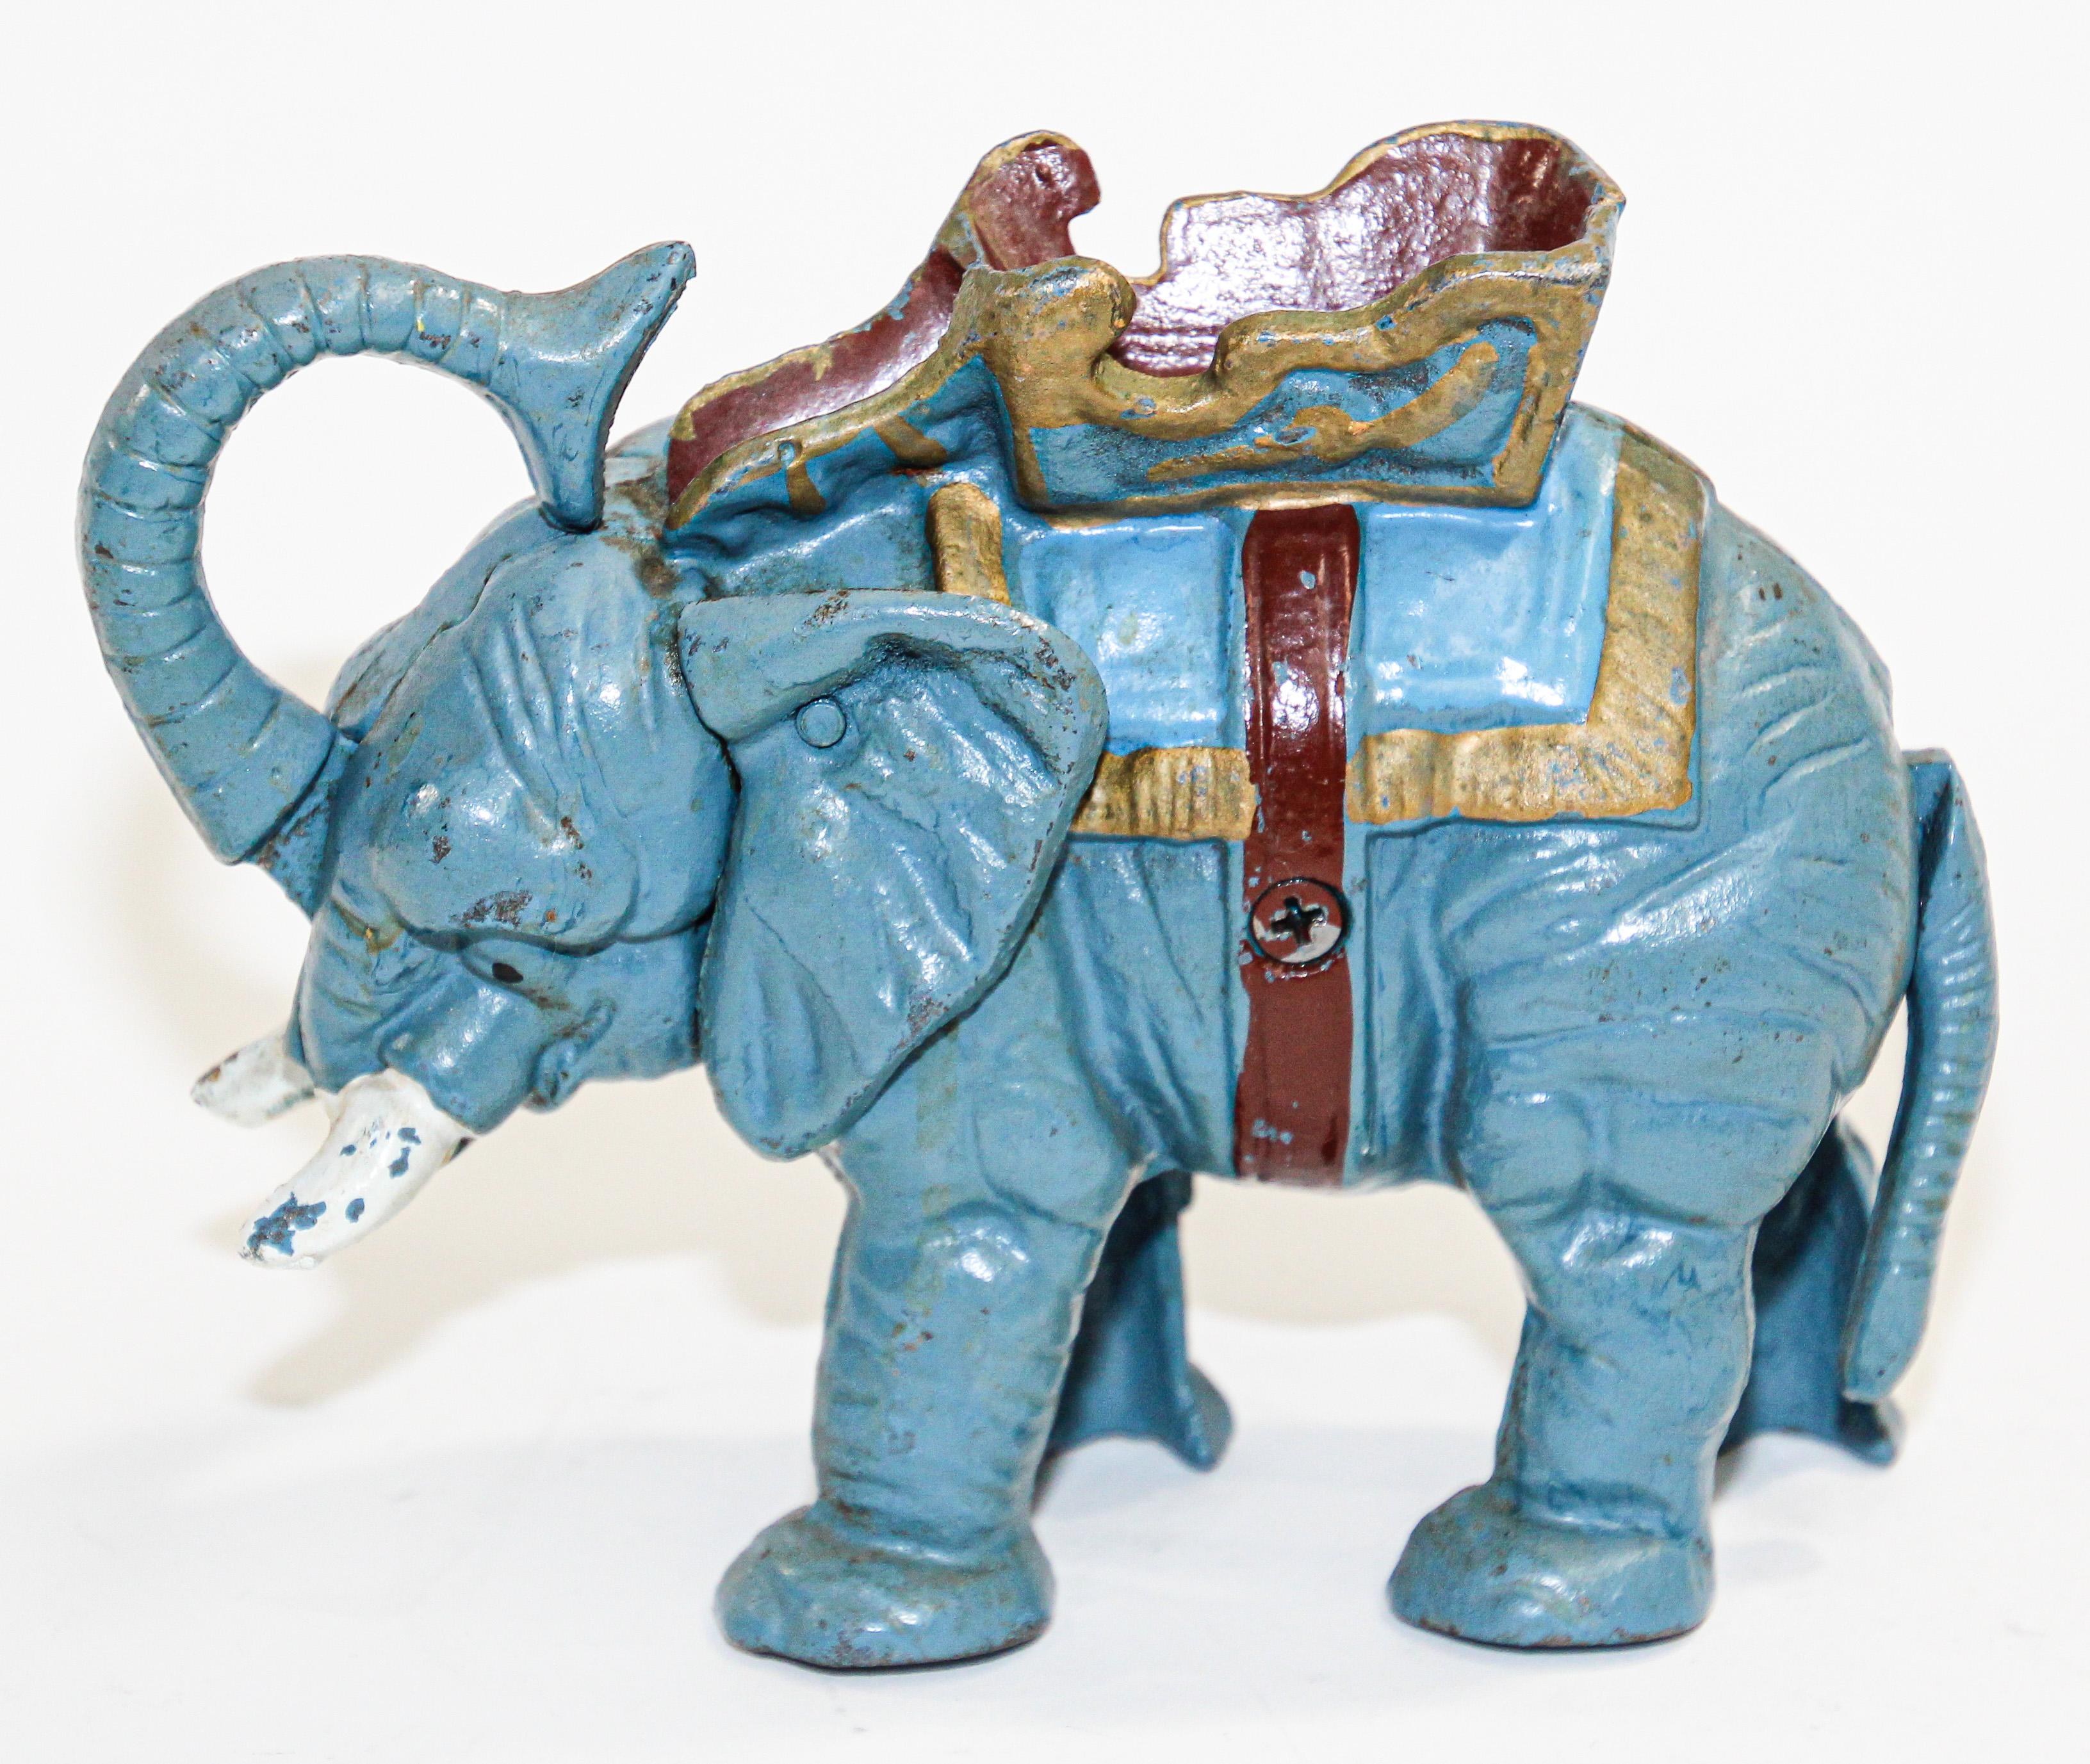 Vintage mechanical hand-painted cast iron elephant coin bank.
Mechanical bank in good working order with the original paint,
It operates as follows: Place a coin in his trunk and pull his trunk and he drops the coin in the bank.
hand painted cast